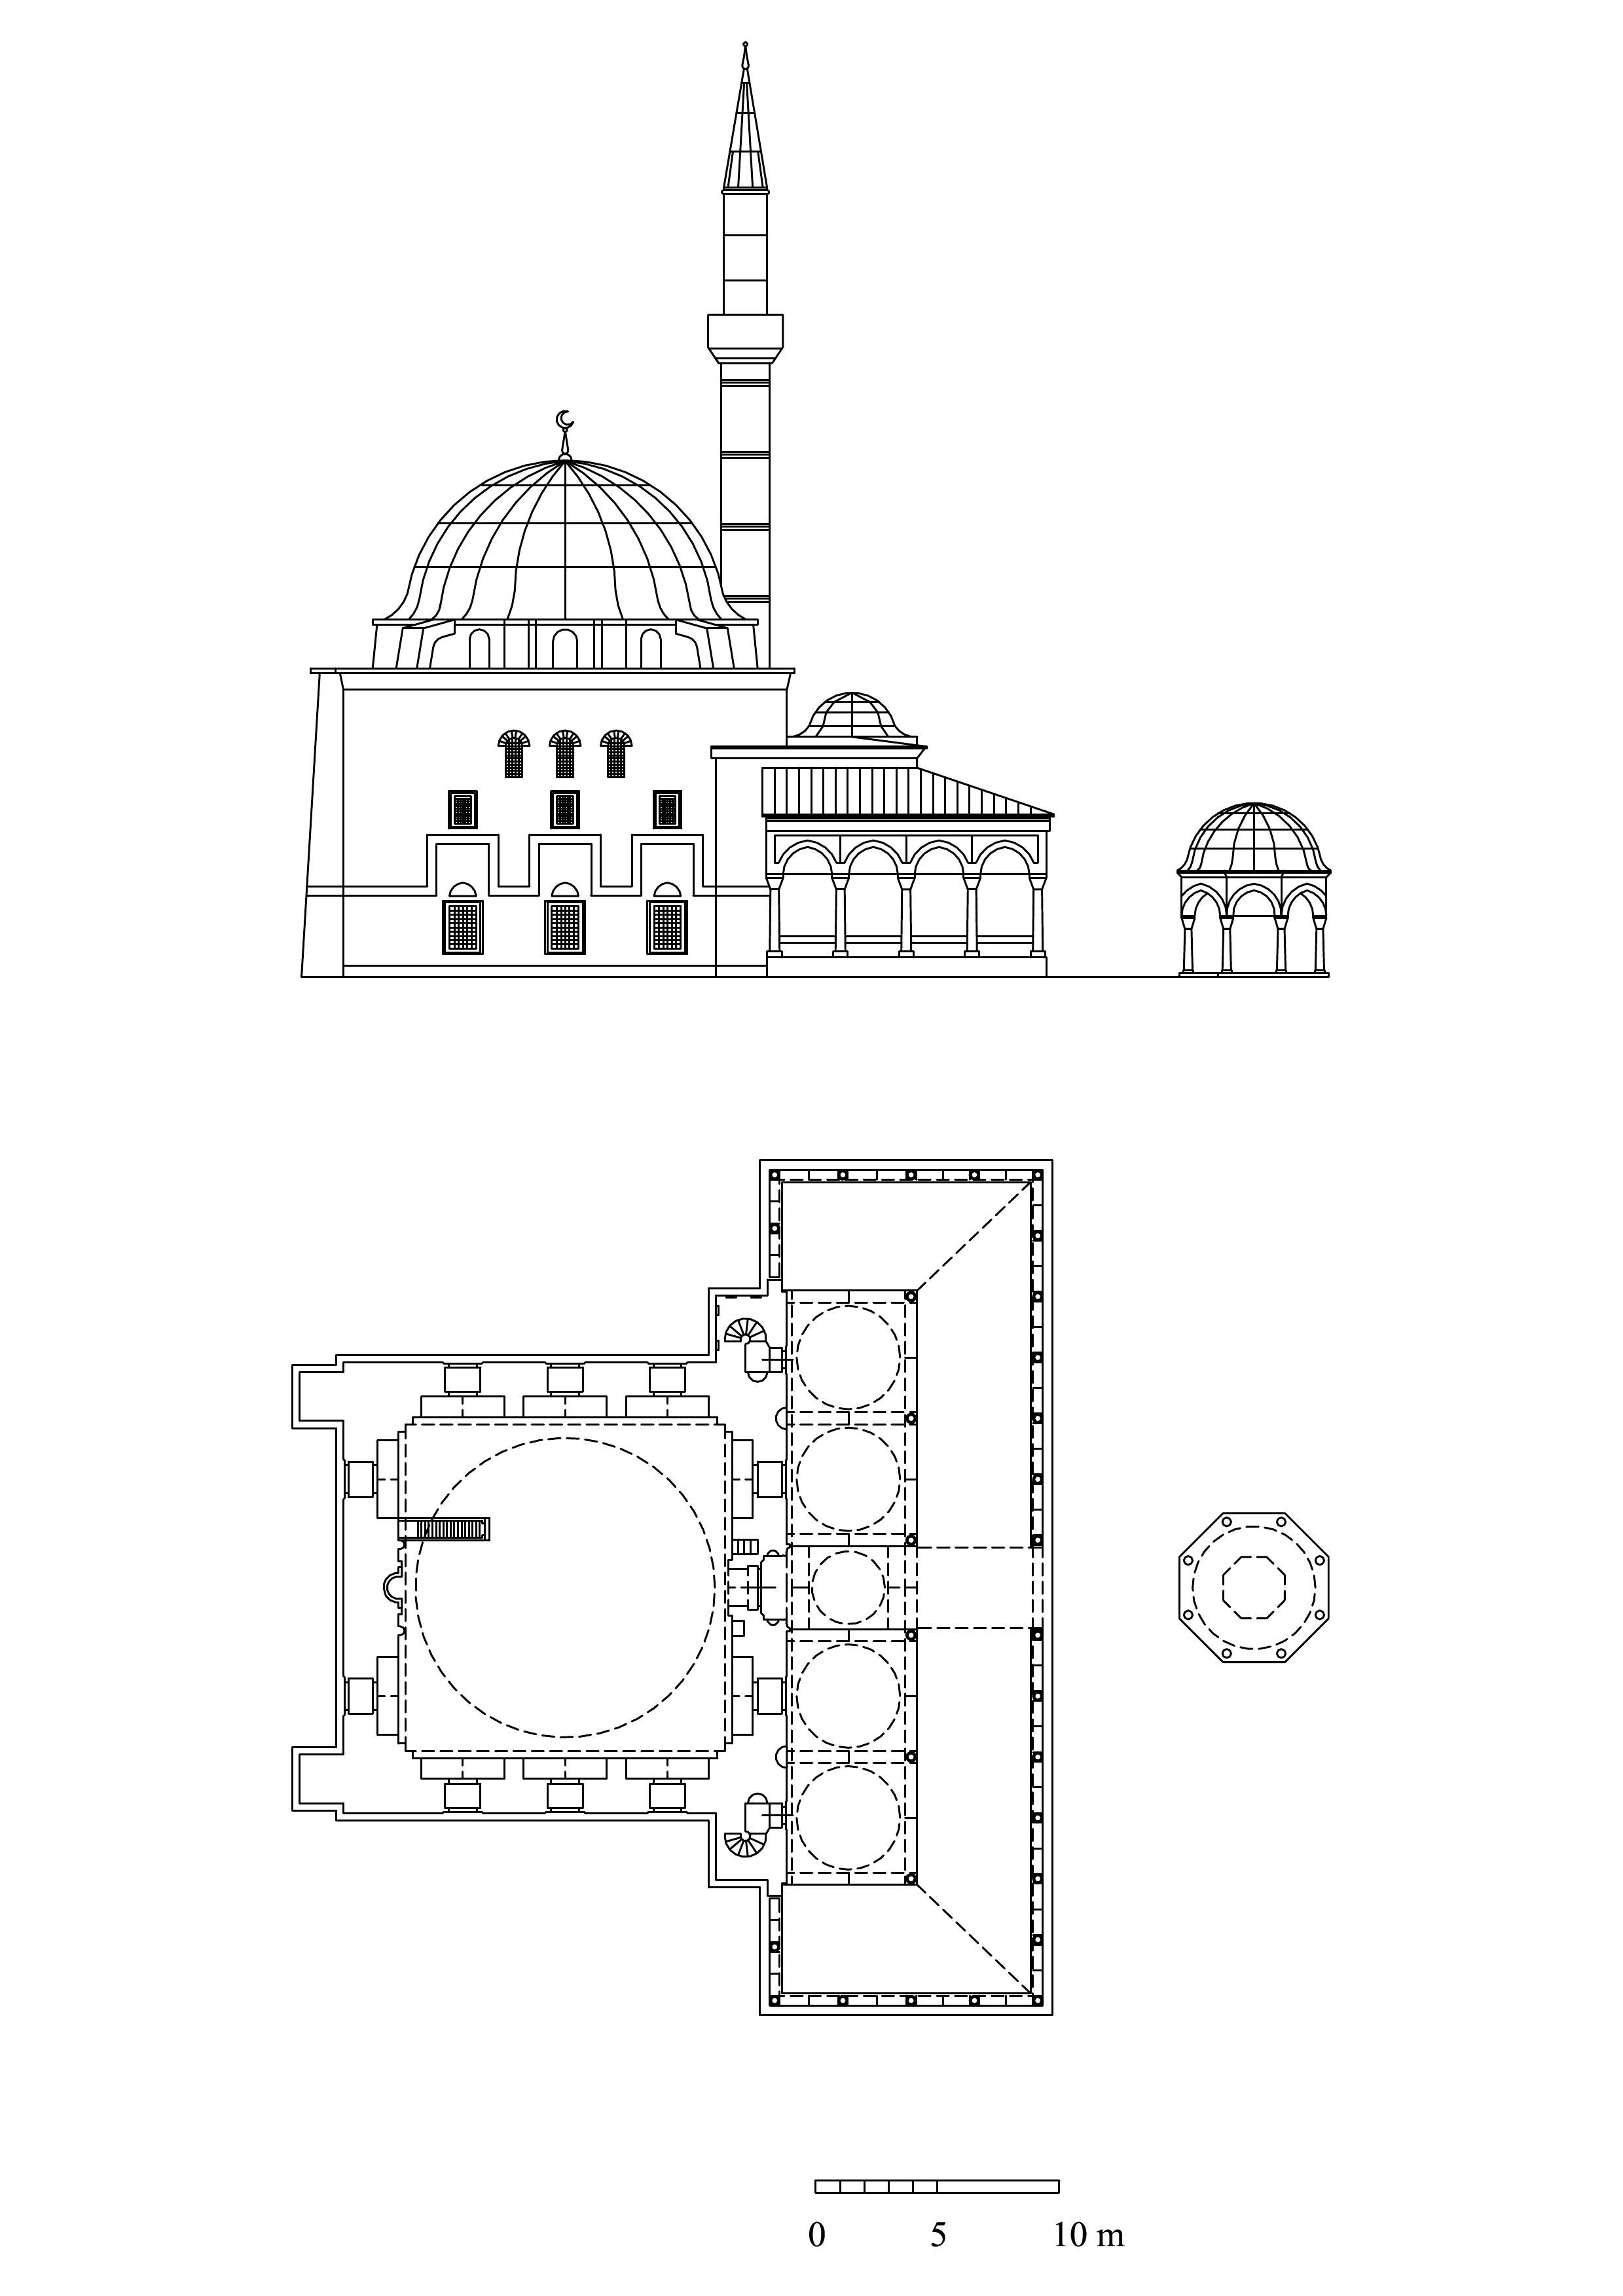 Floor plan and elevation of mosque and ablution fountain